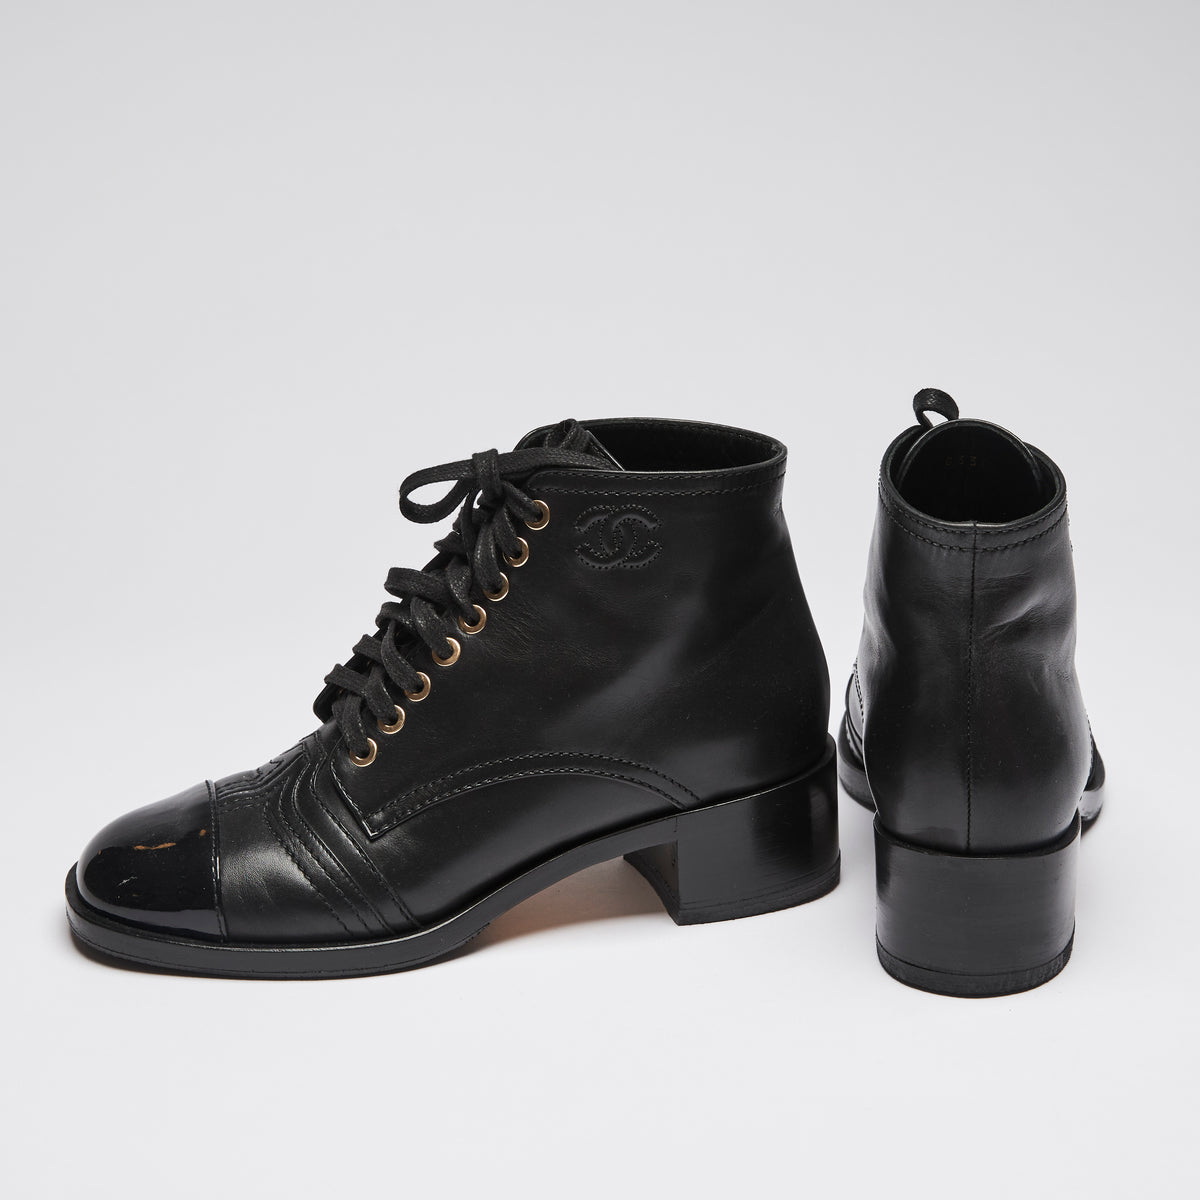 Excellent Pre-Loved Black Leather Square Toe Lace Up Combat Boots with Black Patent Leather Toe Cap.(side)